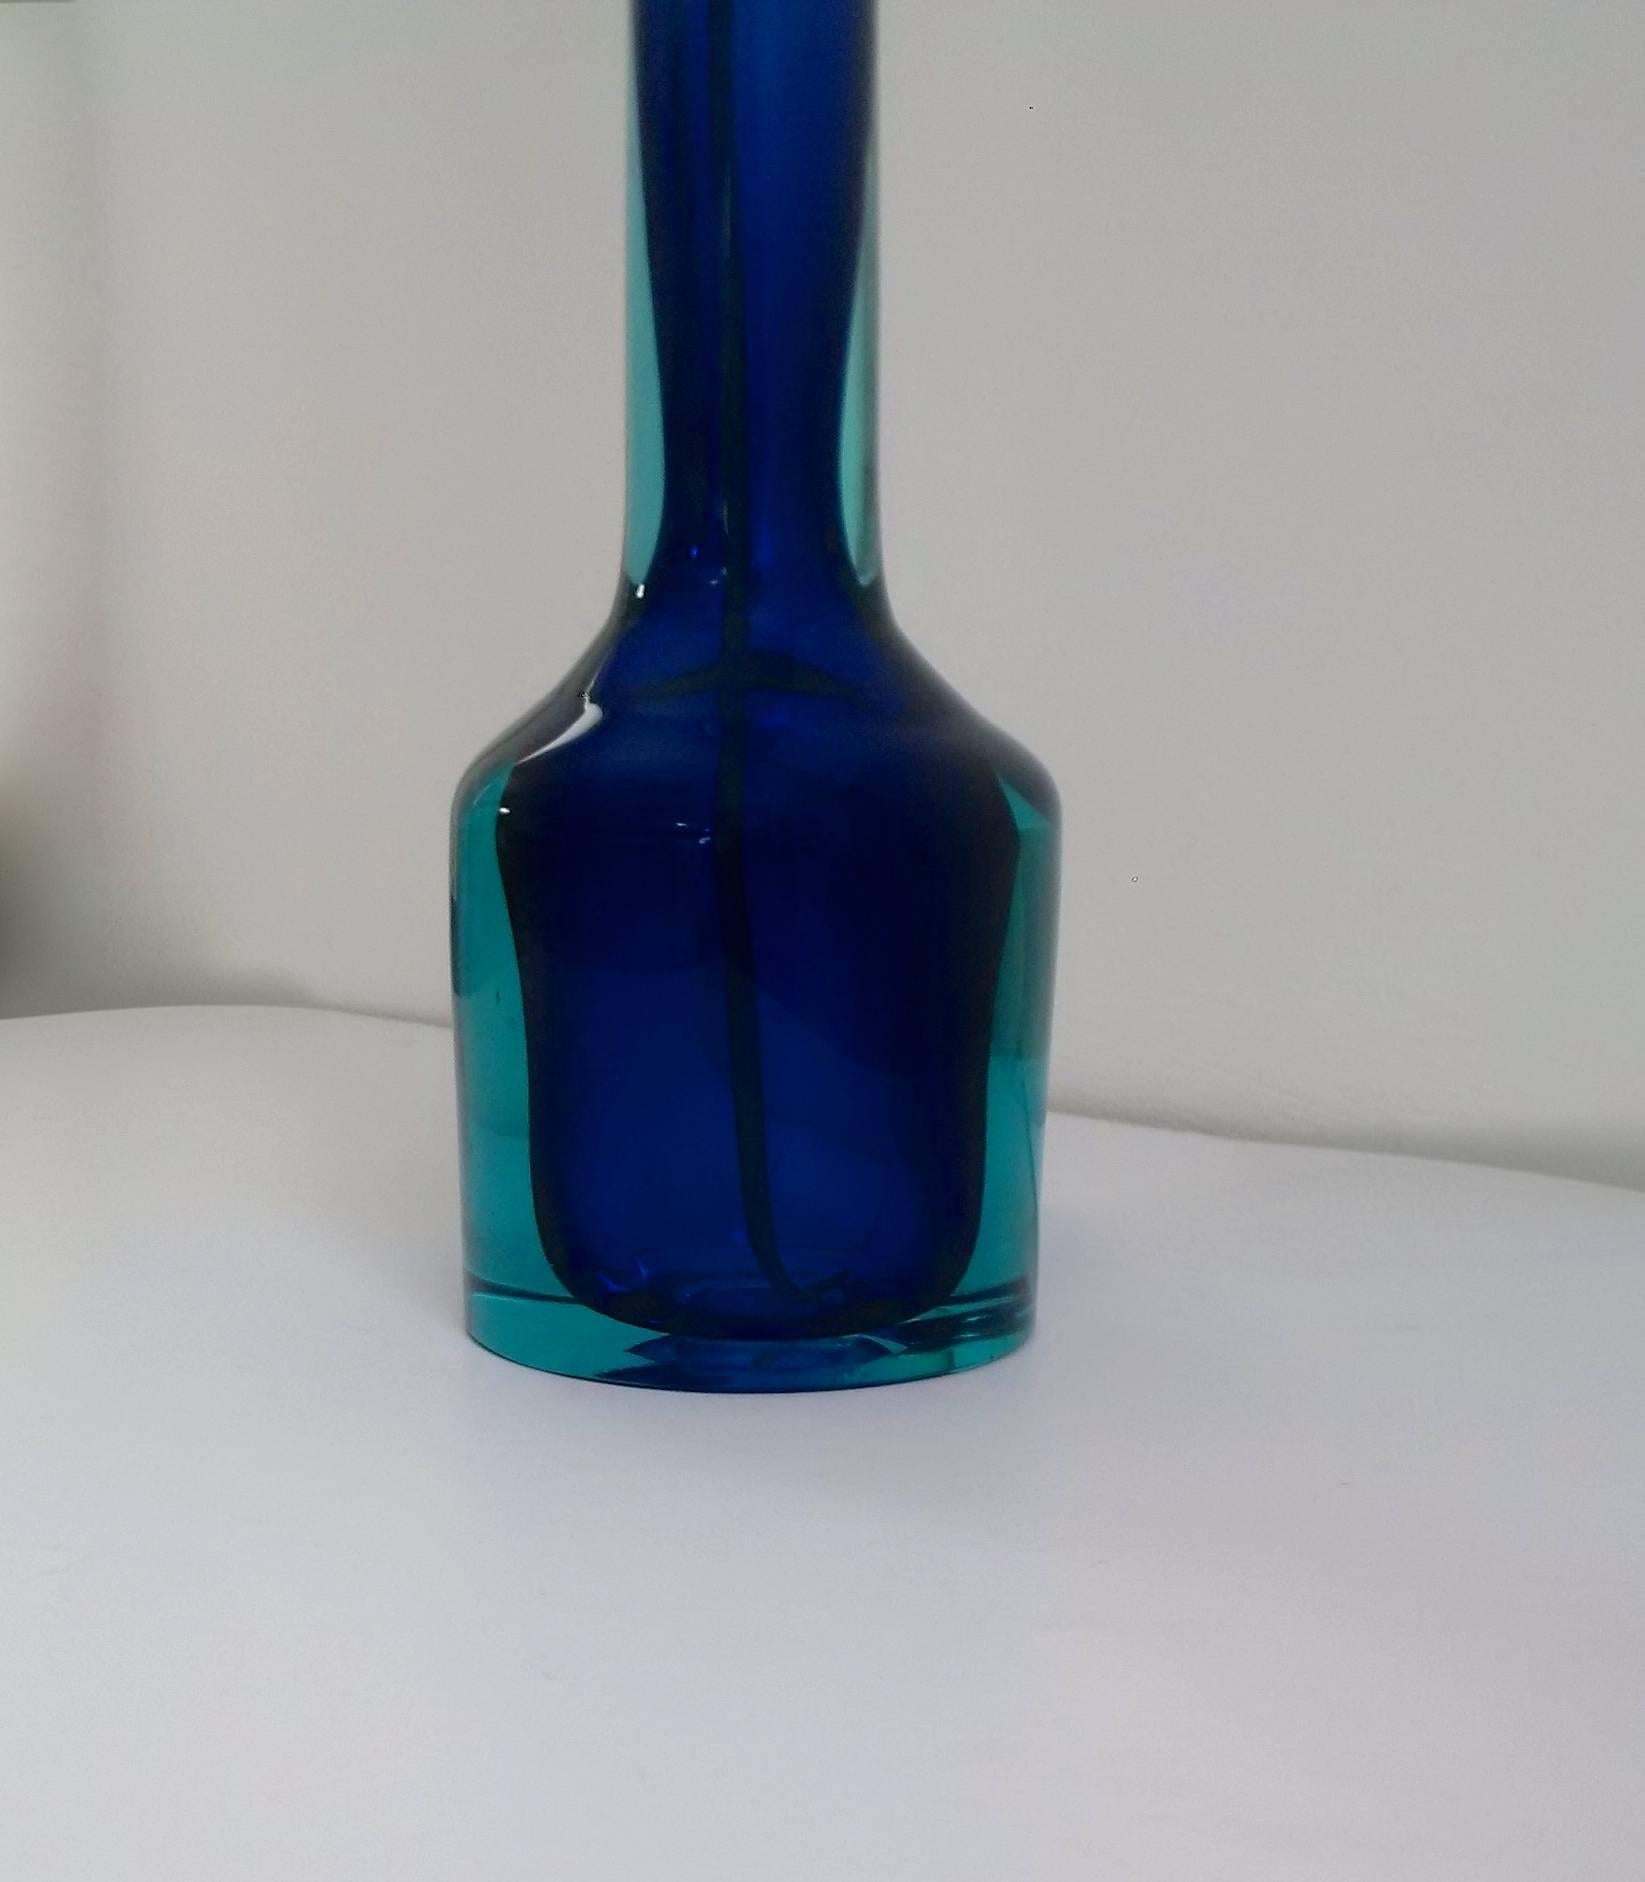 A very sleek modernist design with beautiful blue and green color tones in Sommerso technique. The total height of the glass is 51 cm (+/-21 inches). This is without the light fitting.
The lamp is of an exceptional quality.